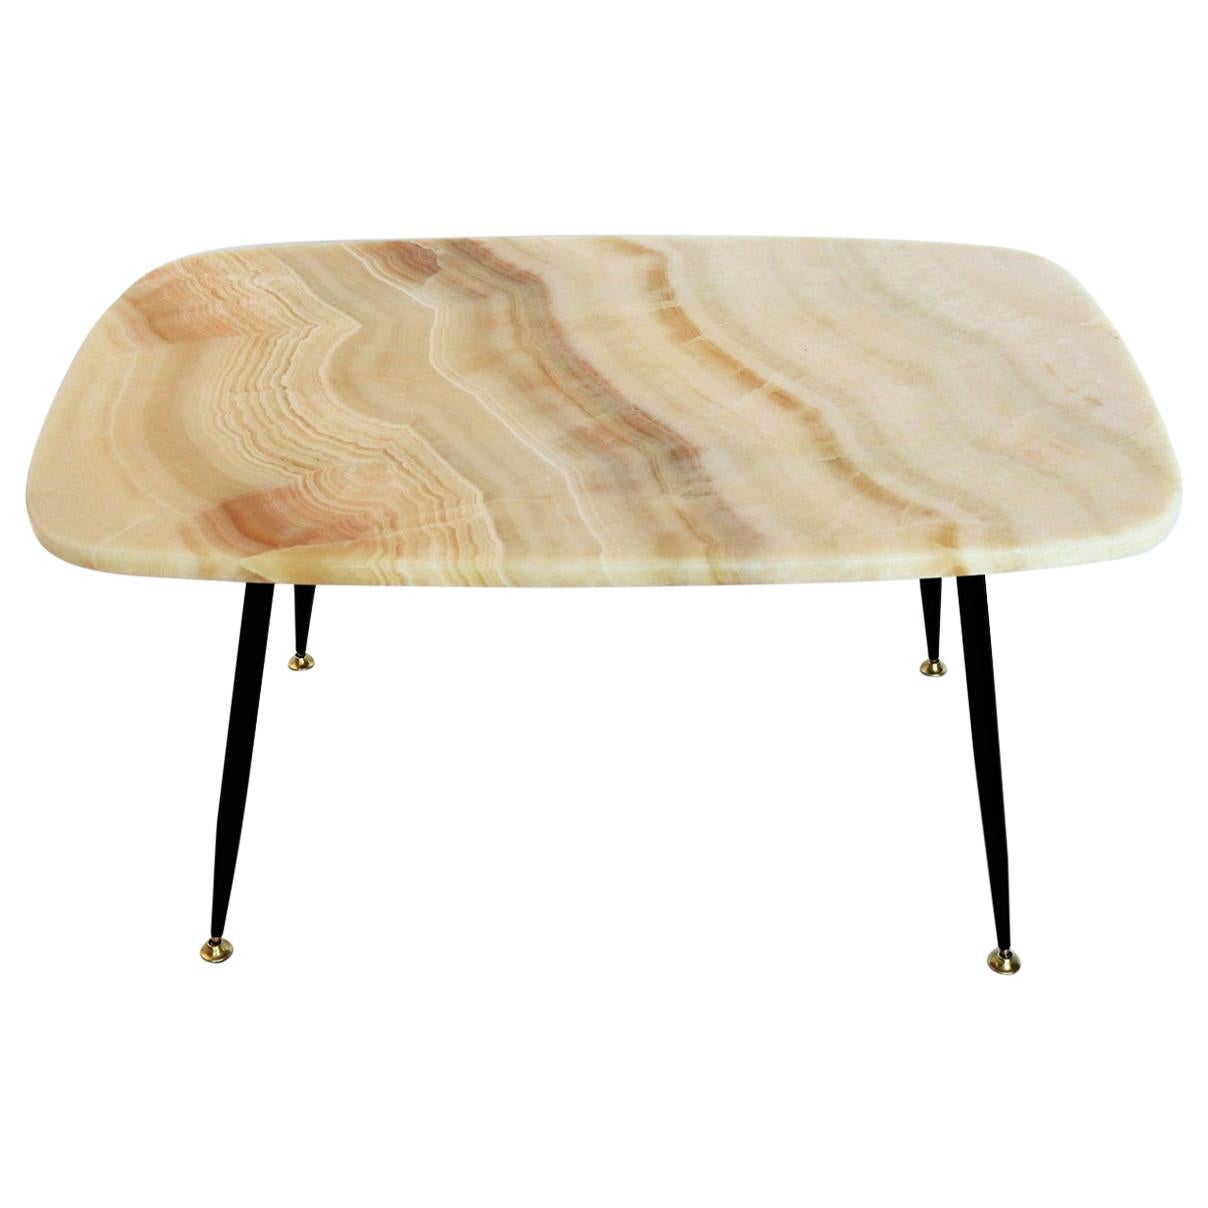 Italian Vintage Midcentury Pink Onyx Marble Coffee Table with Brass Tips, 1950s